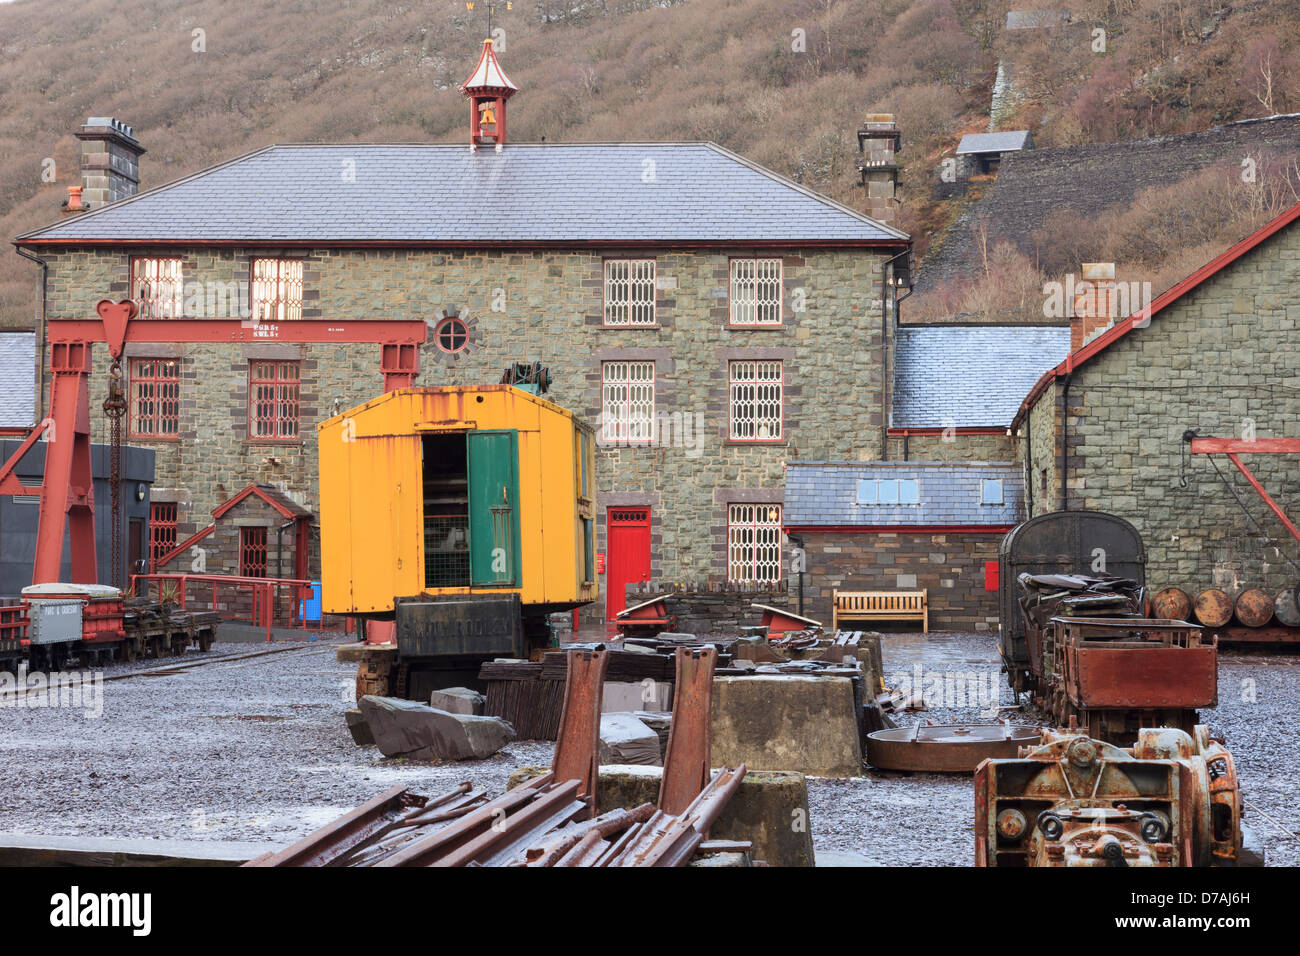 Old machinery in the Welsh National Slate Museum yard in Llanberis, Gwynedd, North Wales, UK, Britain Stock Photo